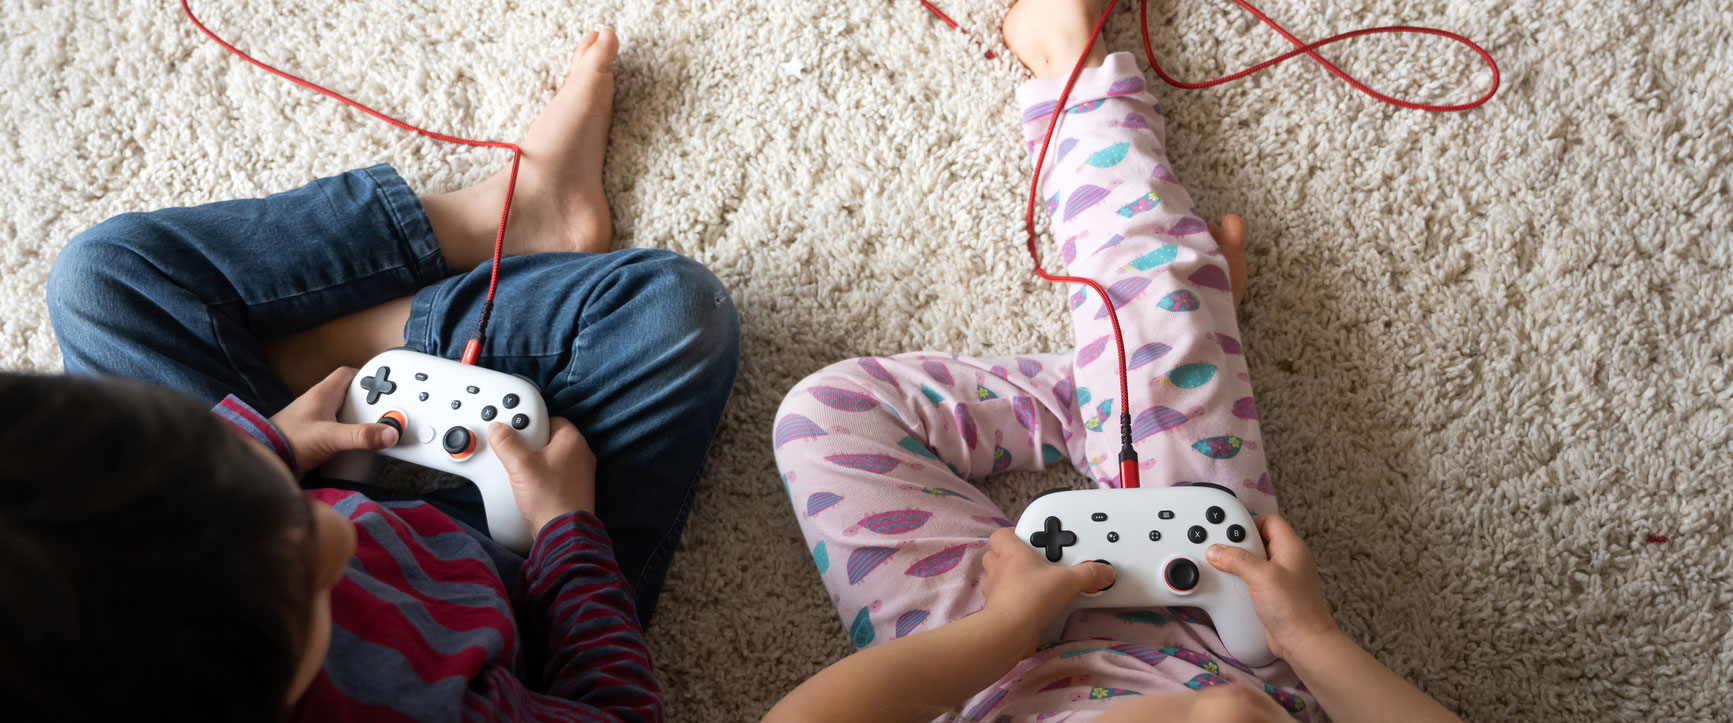 Two young children sit on carpet with video game consoles.